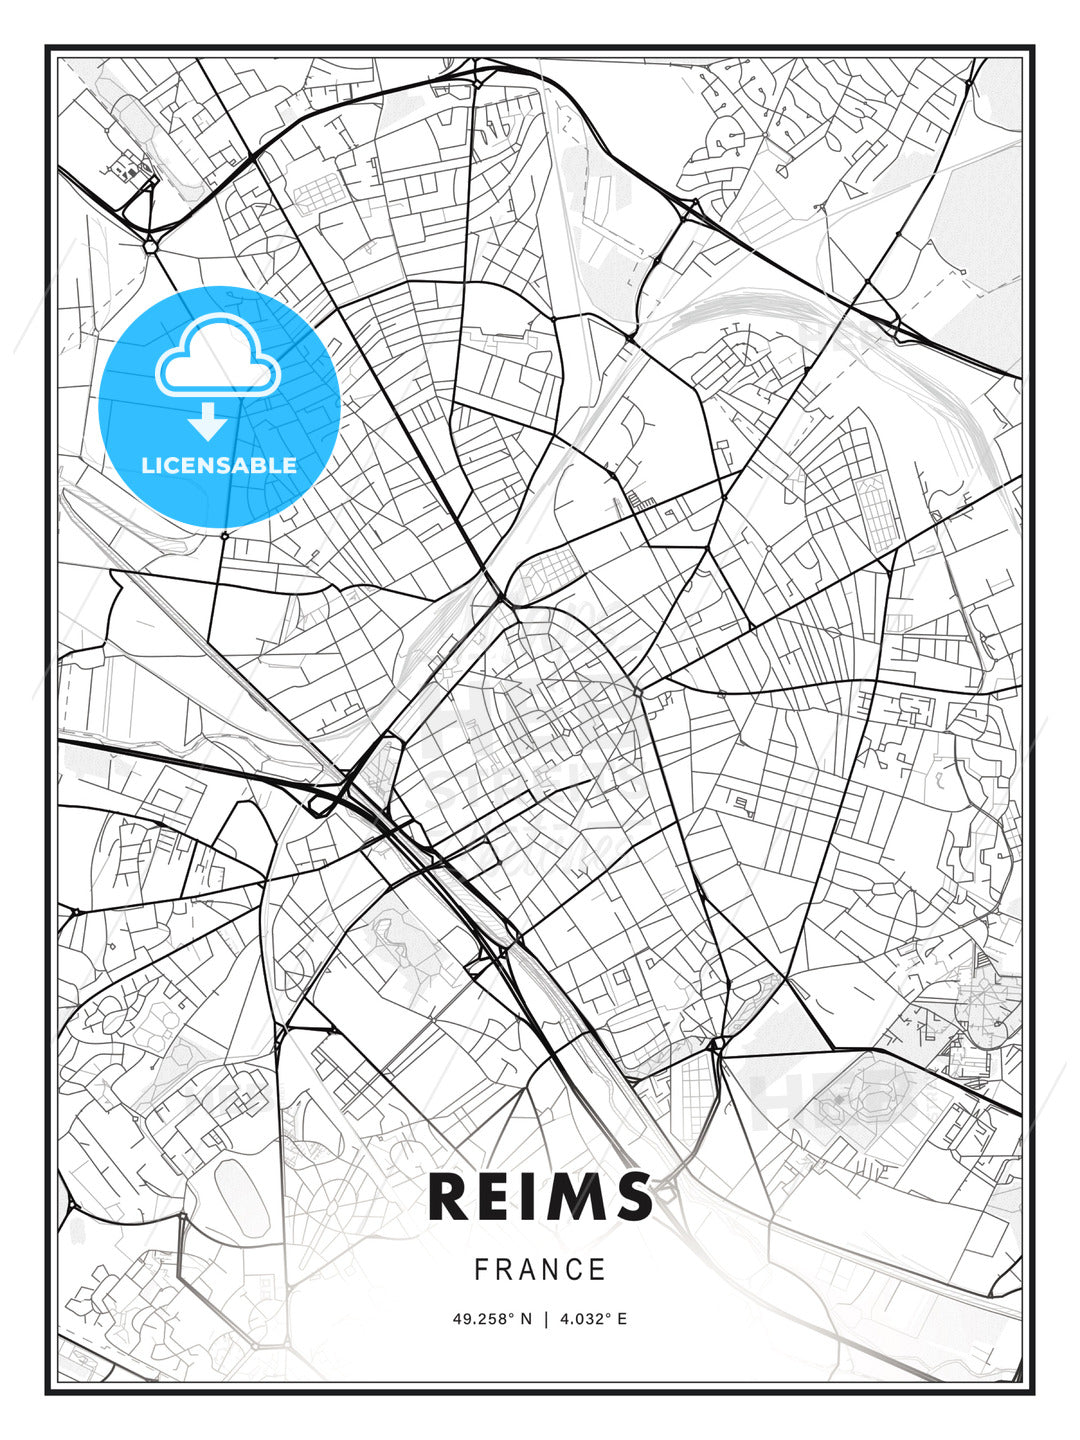 Reims, France, Modern Print Template in Various Formats - HEBSTREITS Sketches